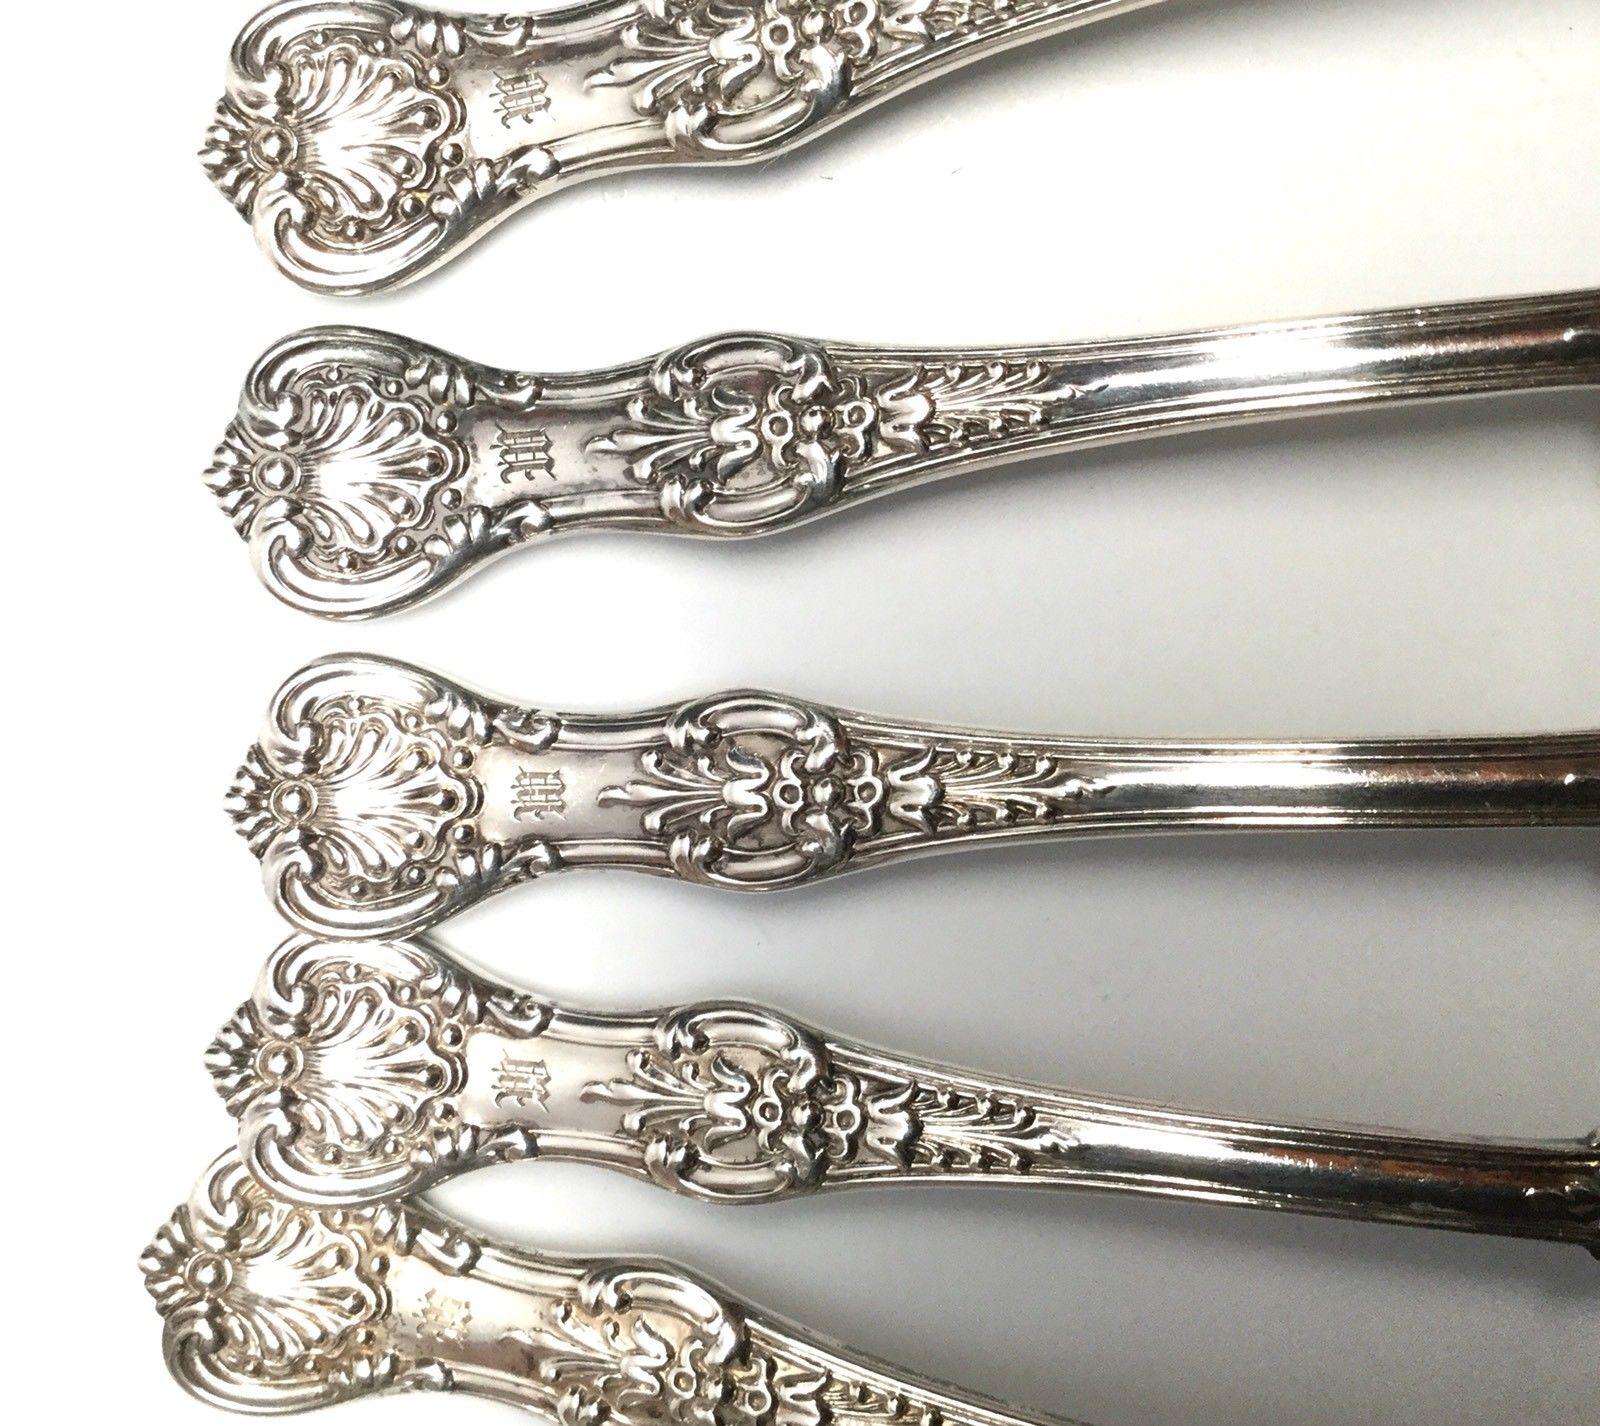 Tiffany & Co English King Pattern 1885 Sterling Silver Set of 5 Demitasse Spoons 4